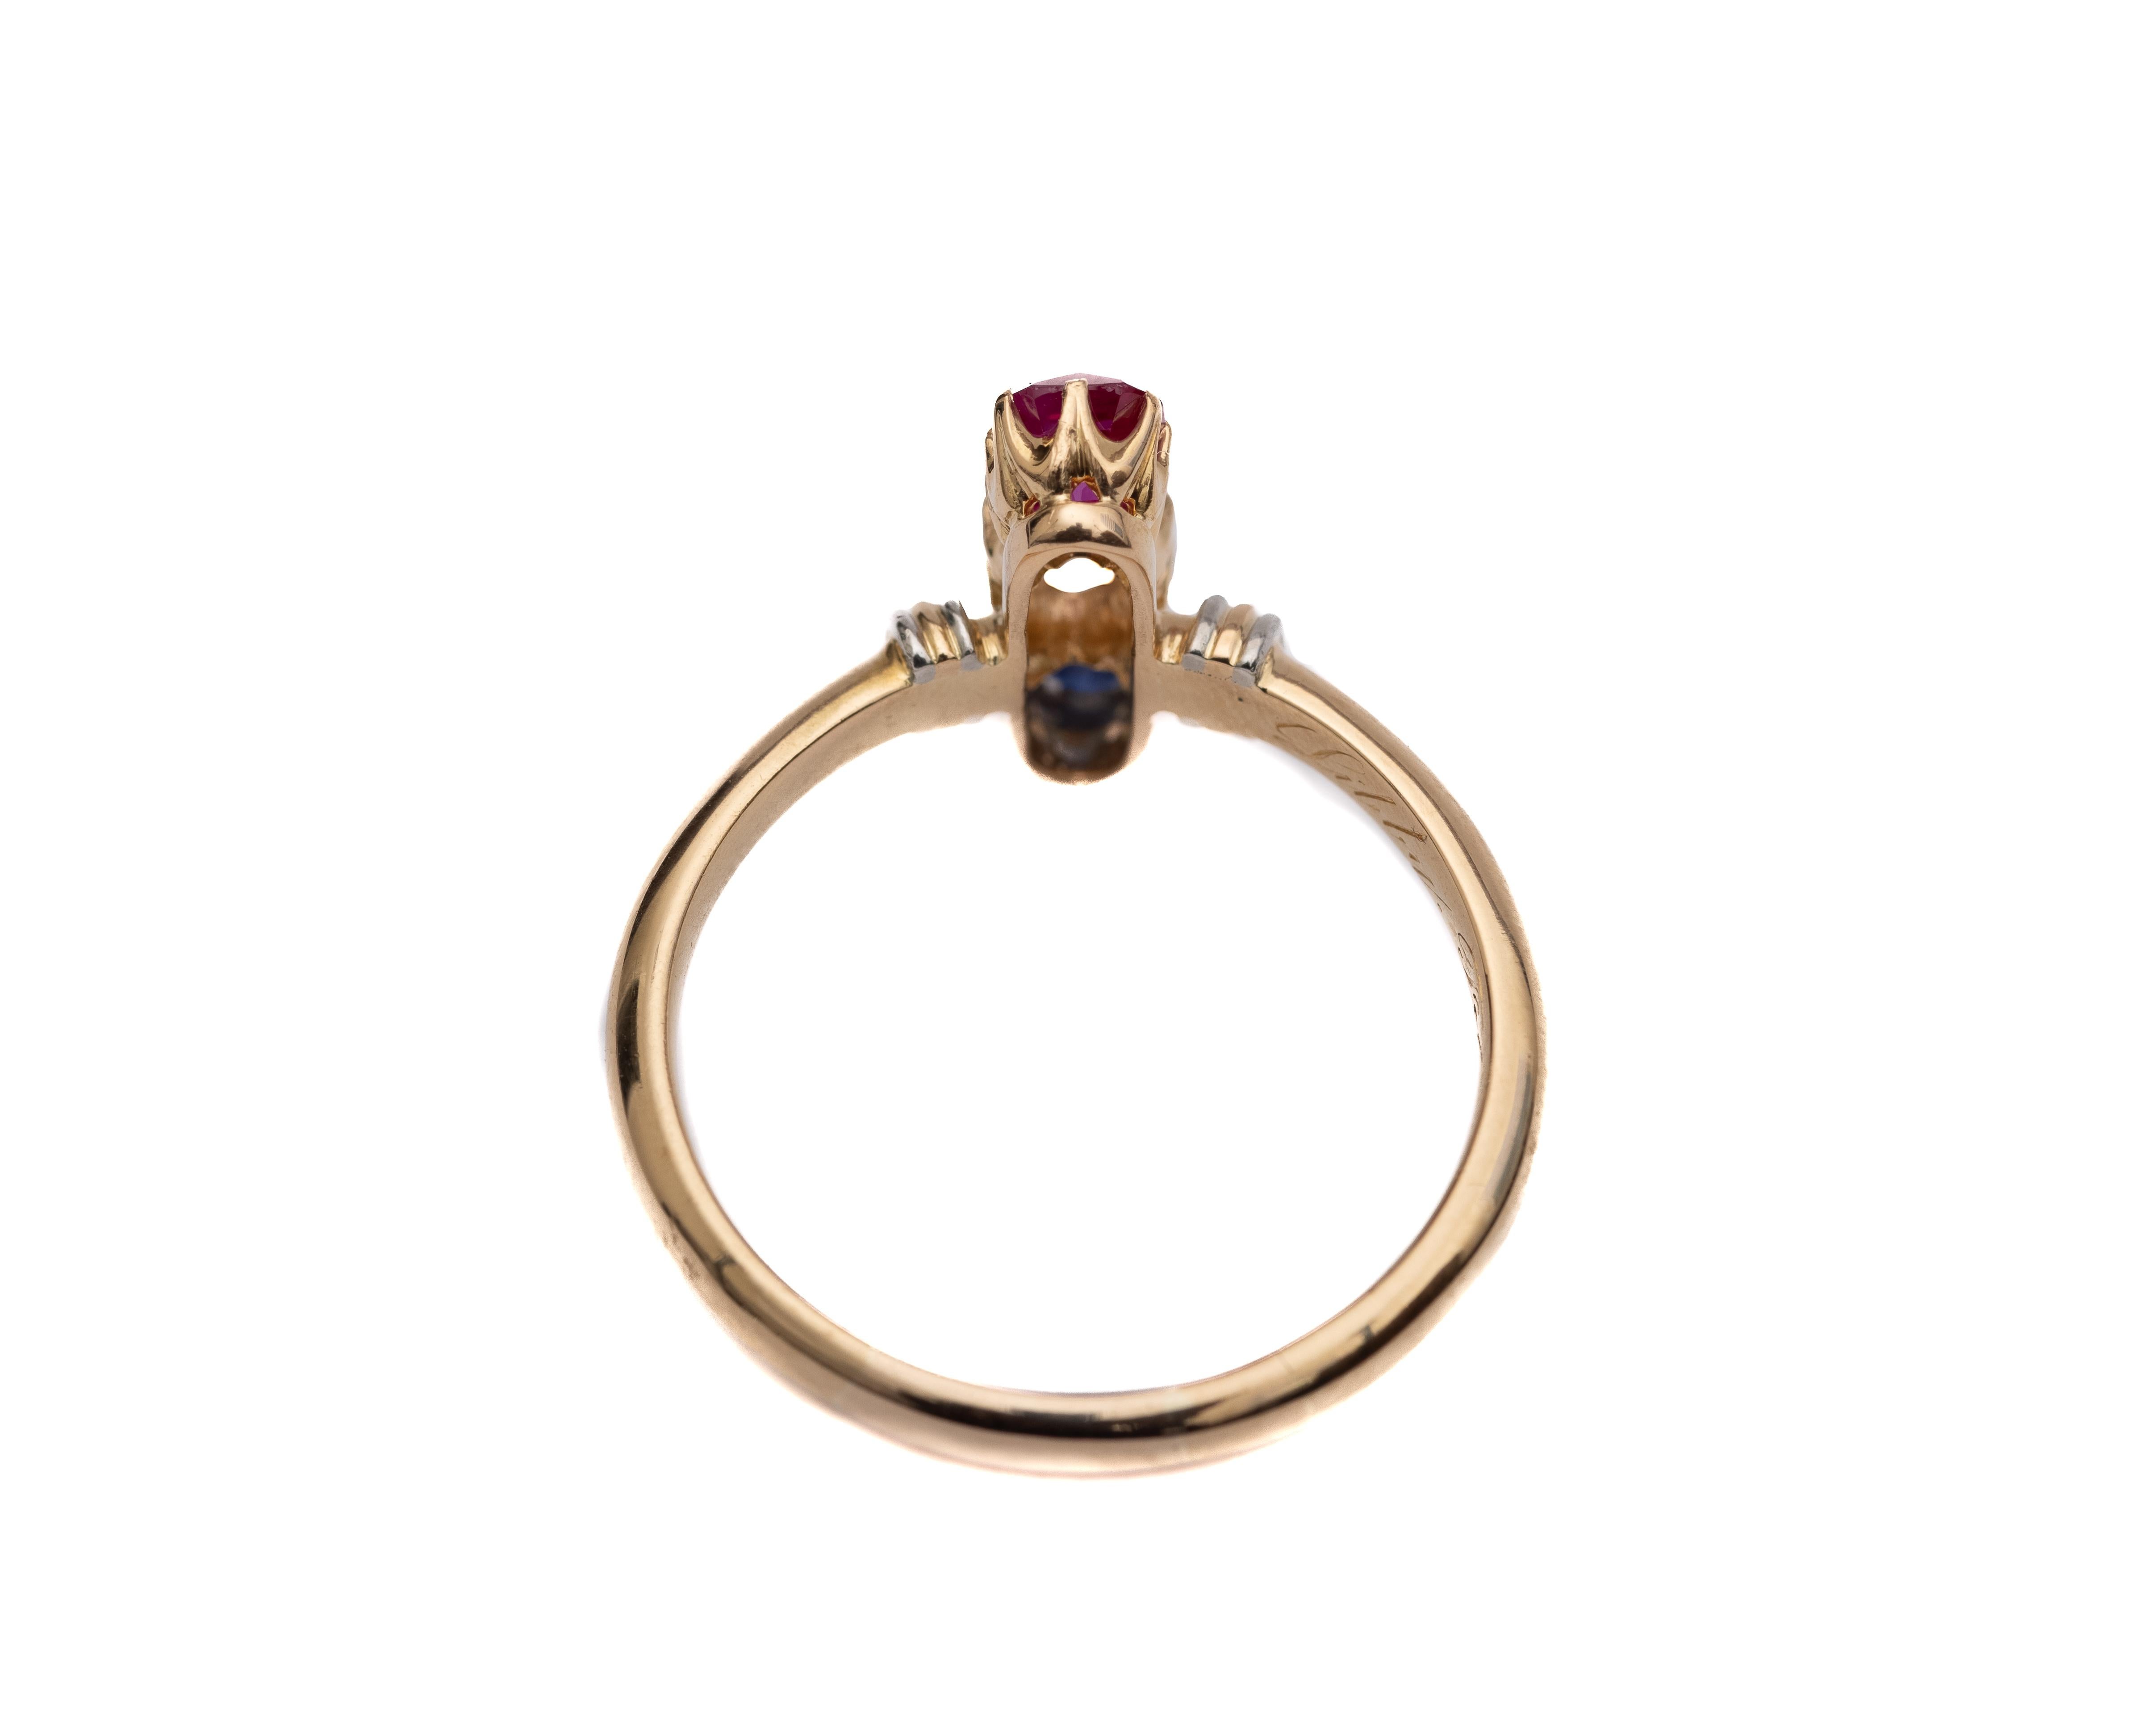 Old Mine Cut Victorian Two-Tone Diamond, Ruby and Sapphire Ring